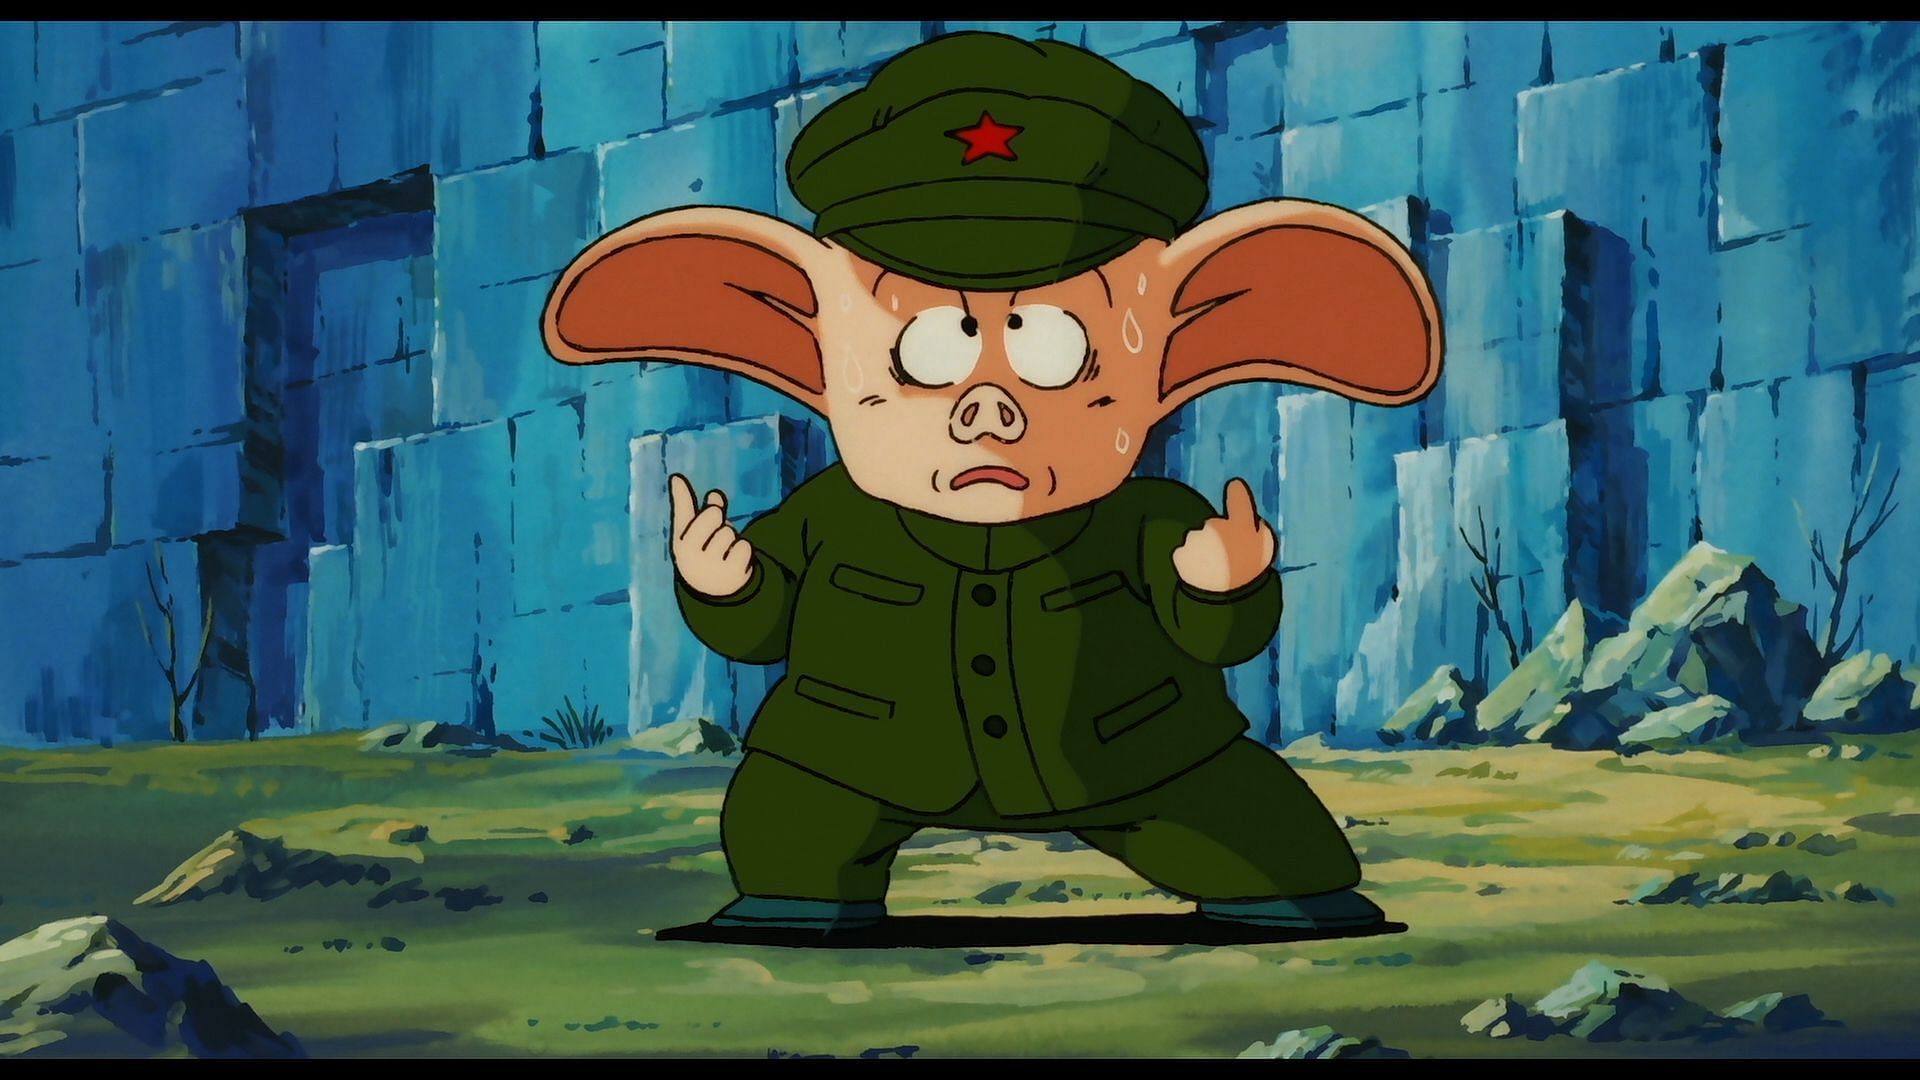 Oolong as seen in the anime series (Image via Toei Animation)